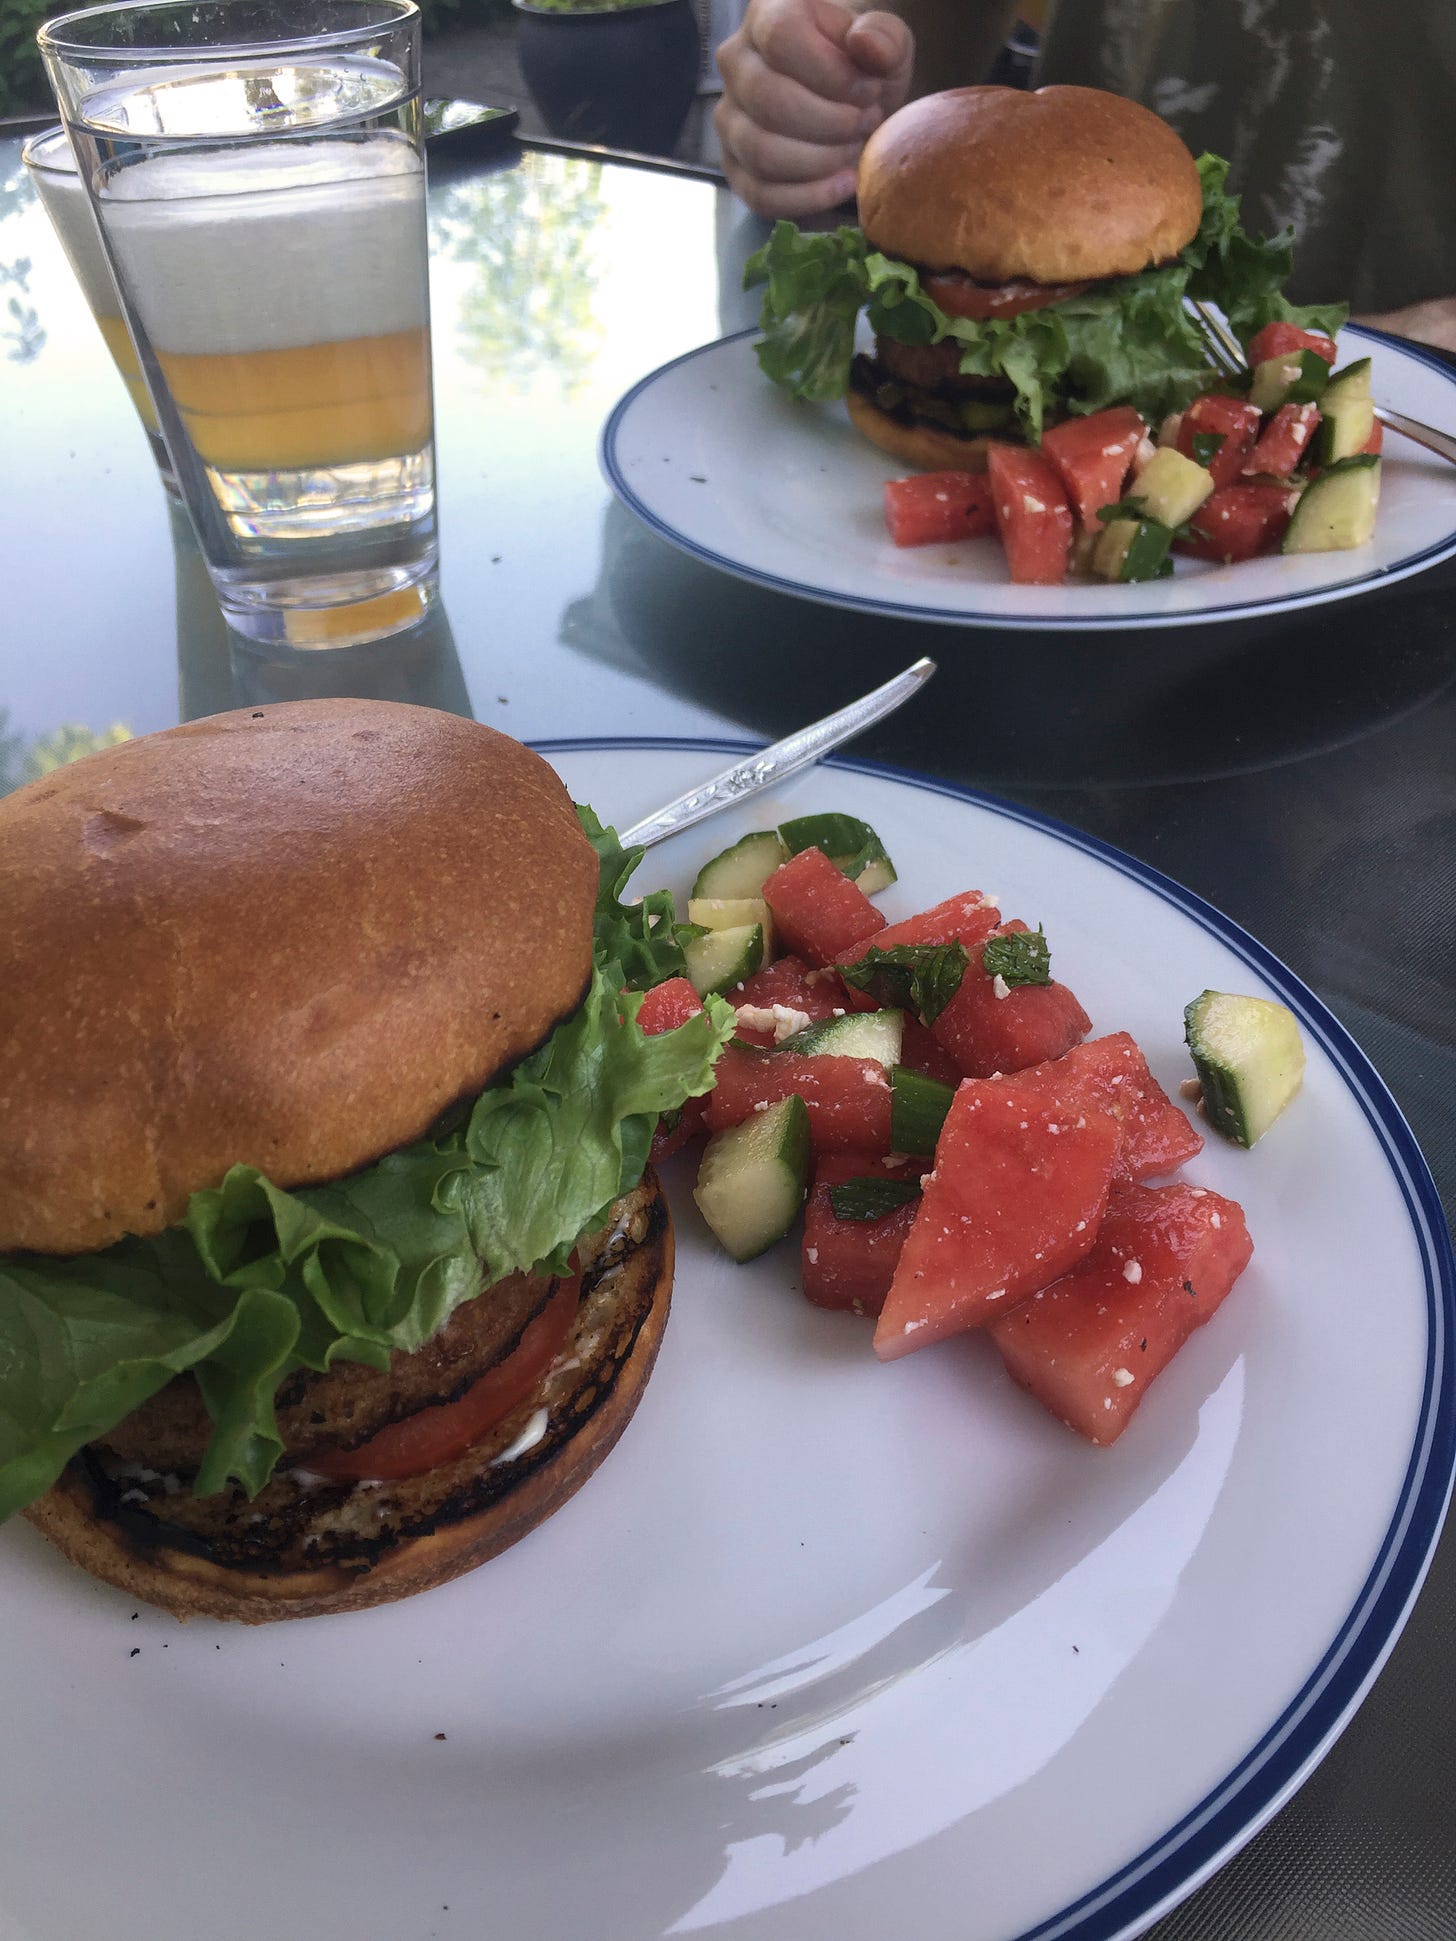 Two white plates with blue rims on an outdoor table. Each plate has a burger with a toasted bun and lettuce peeking out around the edges, next to a bright salad of watermelon and cucumber with mint and feta.